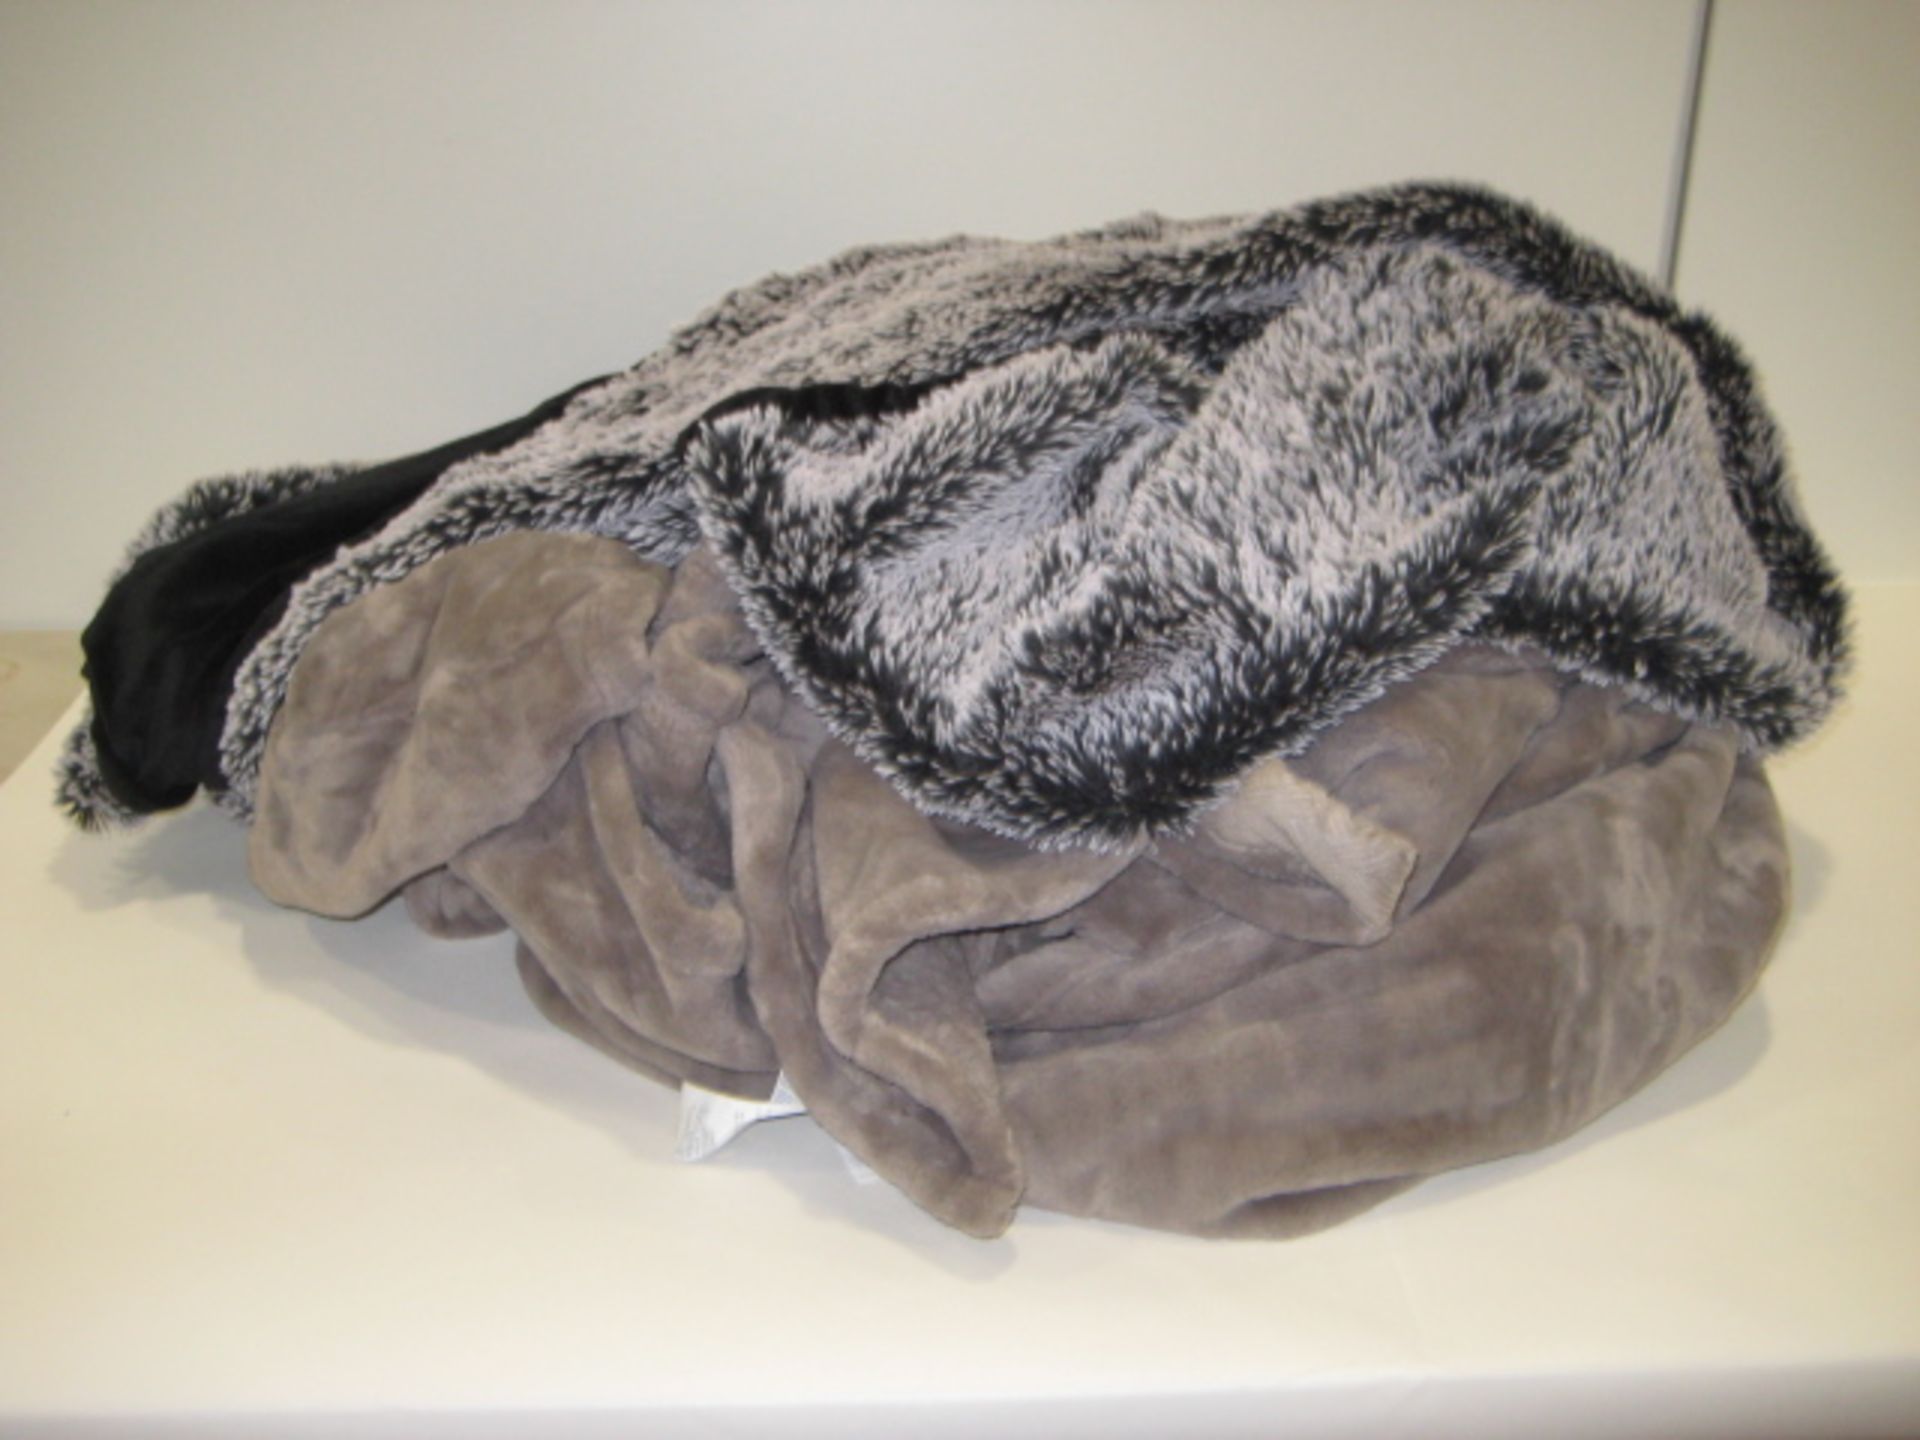 Bag containing 2 large throws, 1 light brown, 1 mottled grey and white